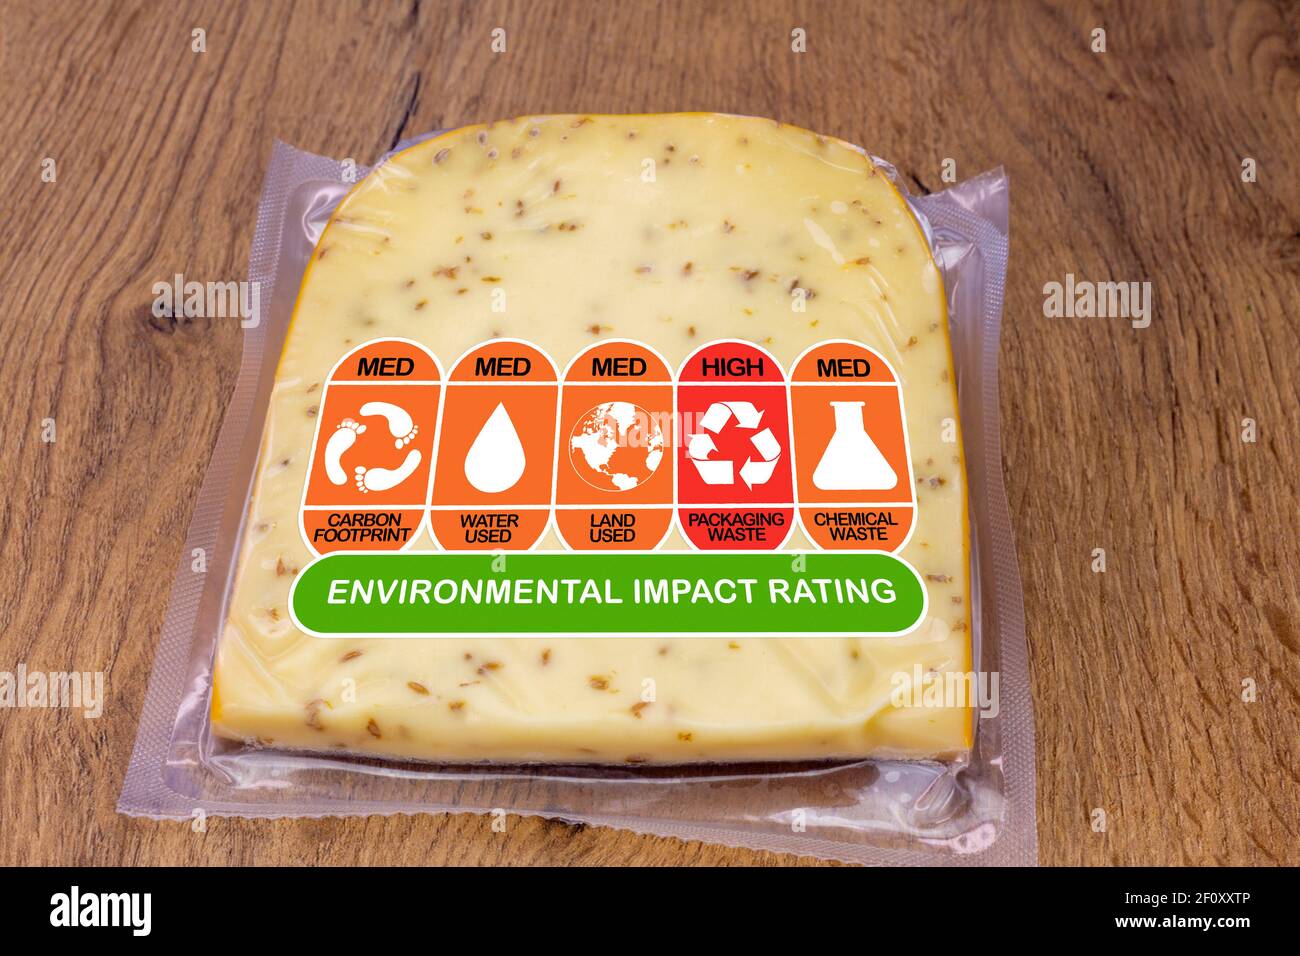 Environmental Impact Rating on packet of cheese with high, med and low ratings for food carbon footprint, water use, land use, packaging waste and che Stock Photo